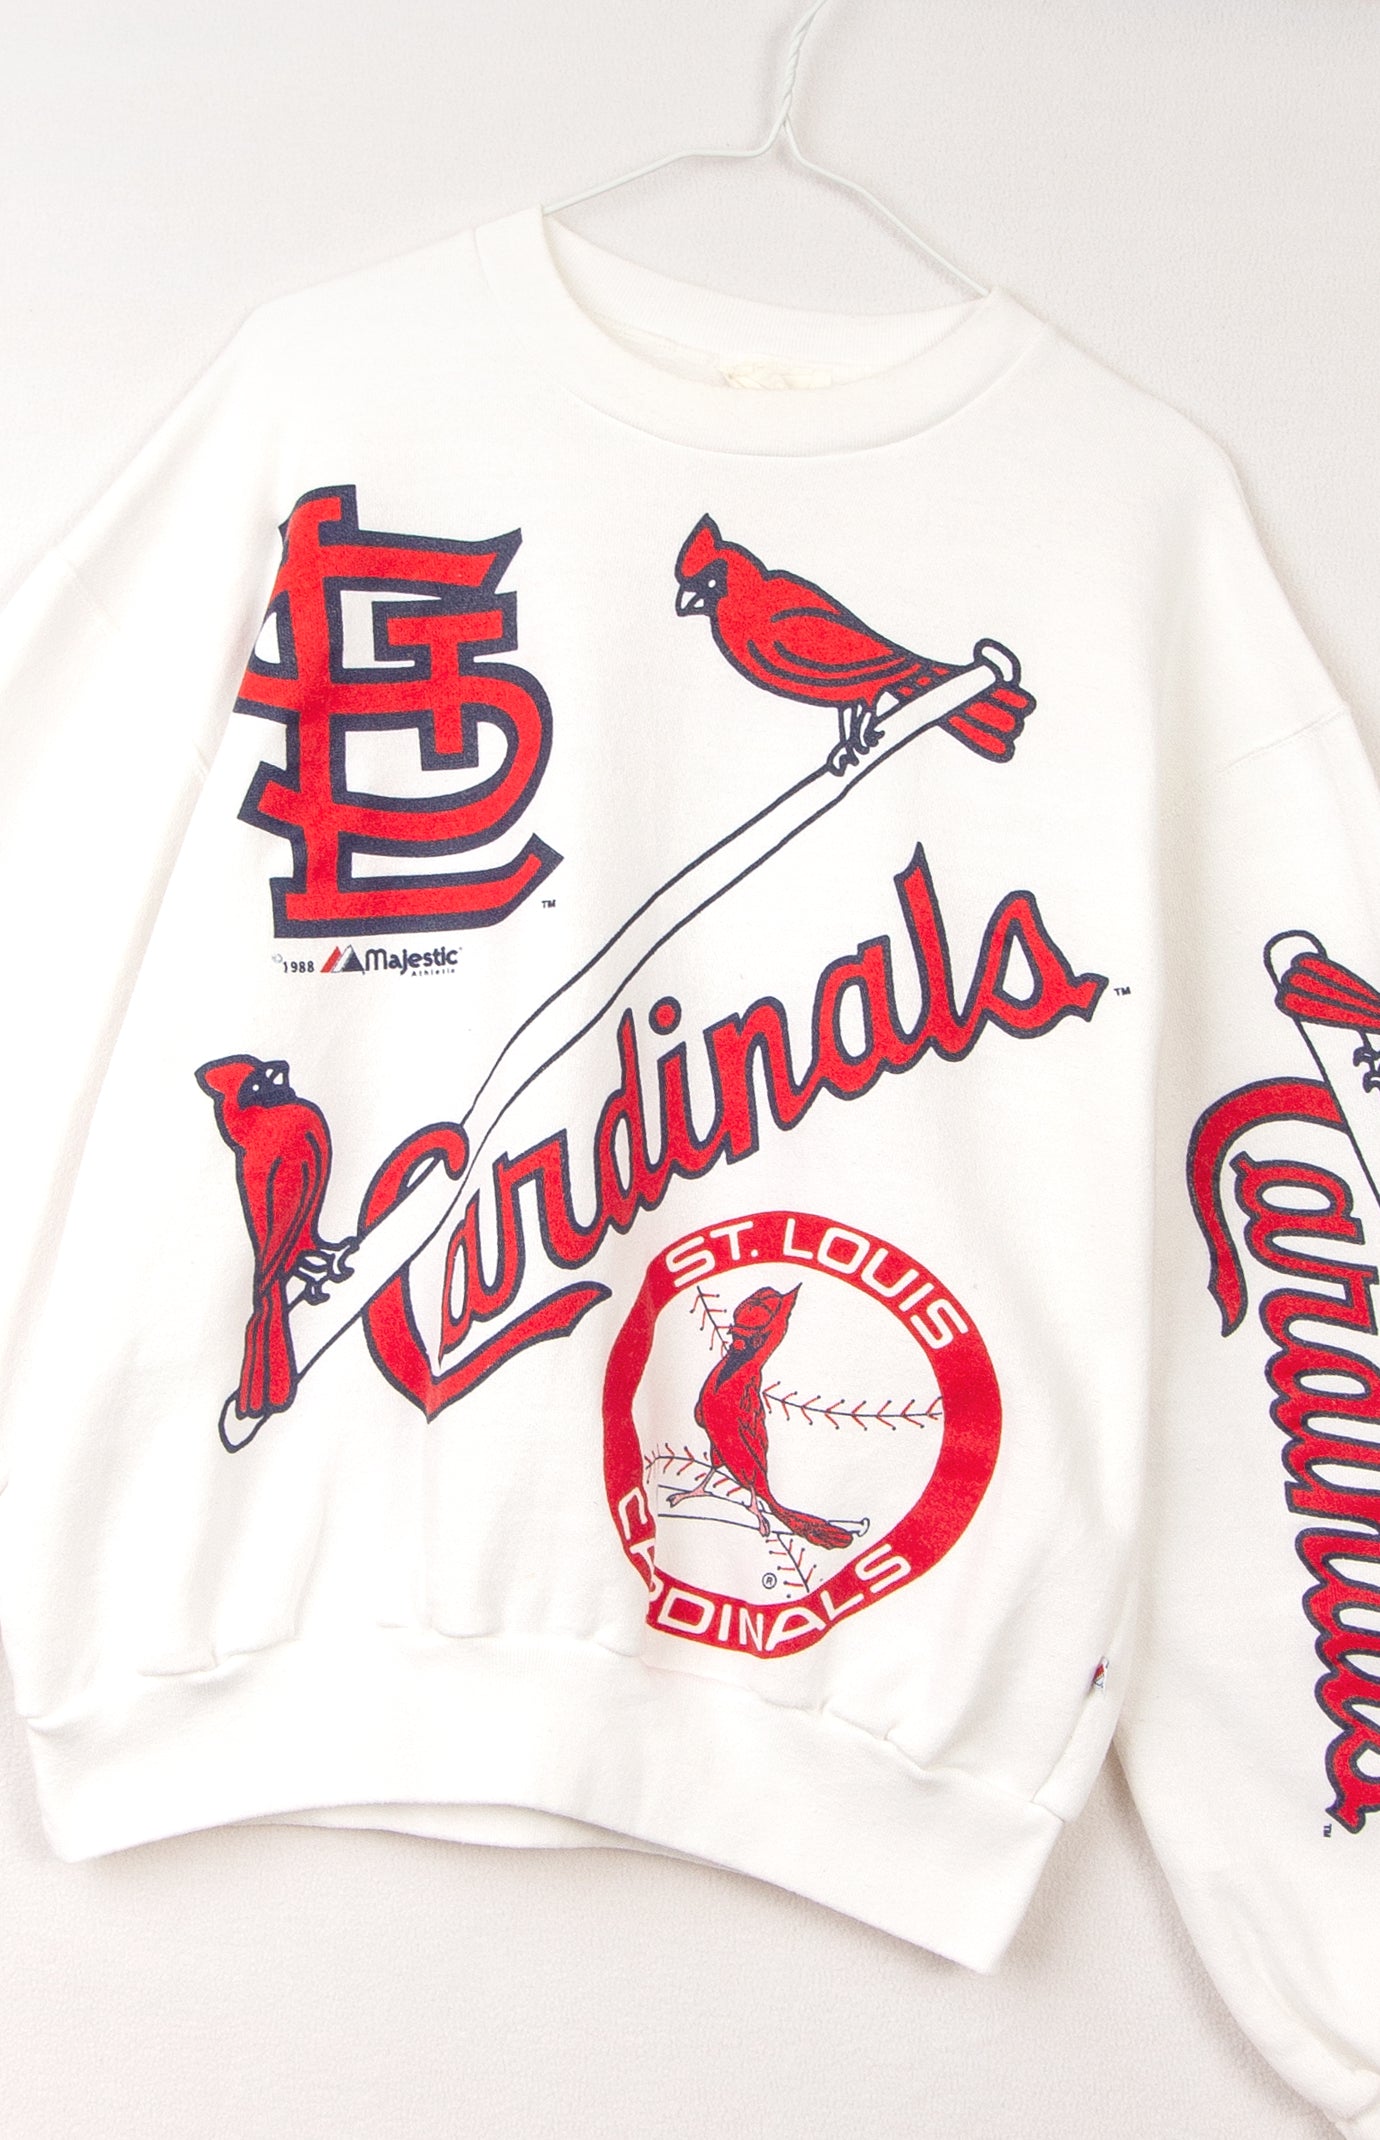 GOAT Vintage Upcycled St. Louis Cardinals T-Shirt